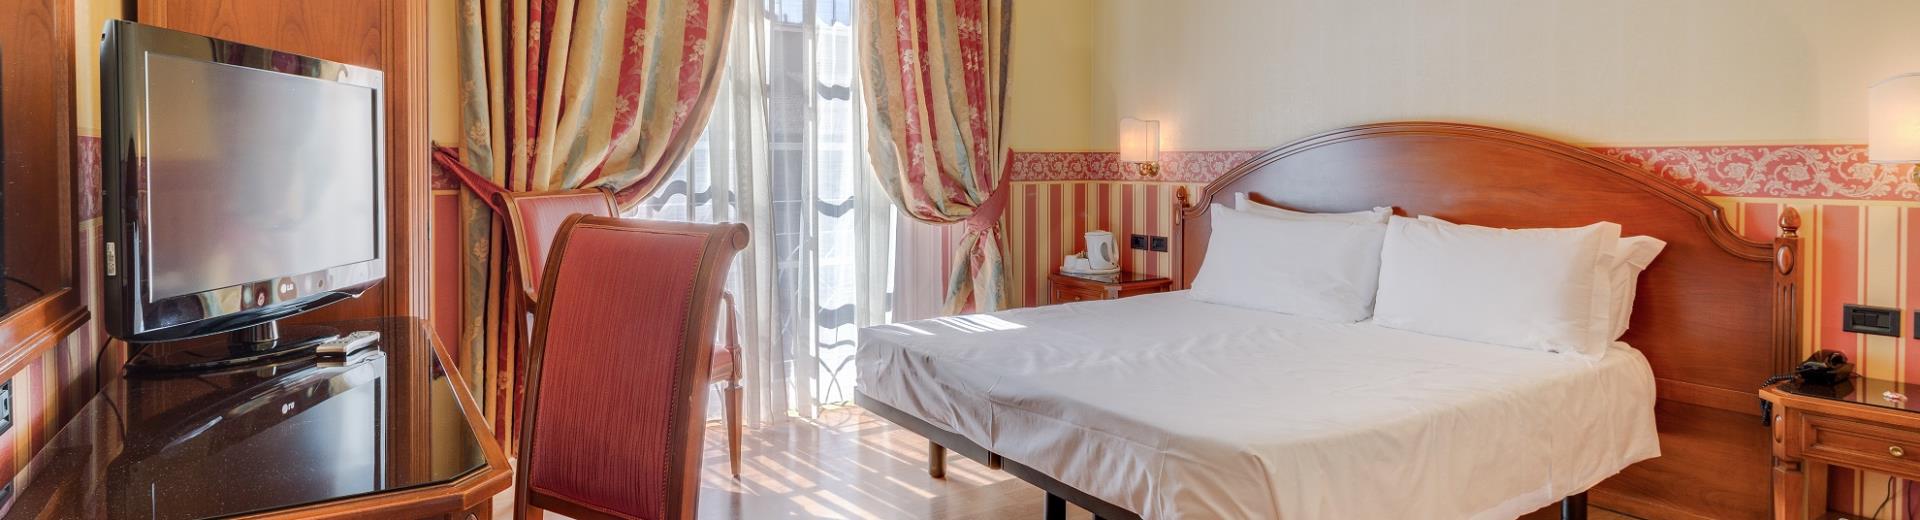 Deluxe rooms in the Centre of Bologna at the Hotel San Donato